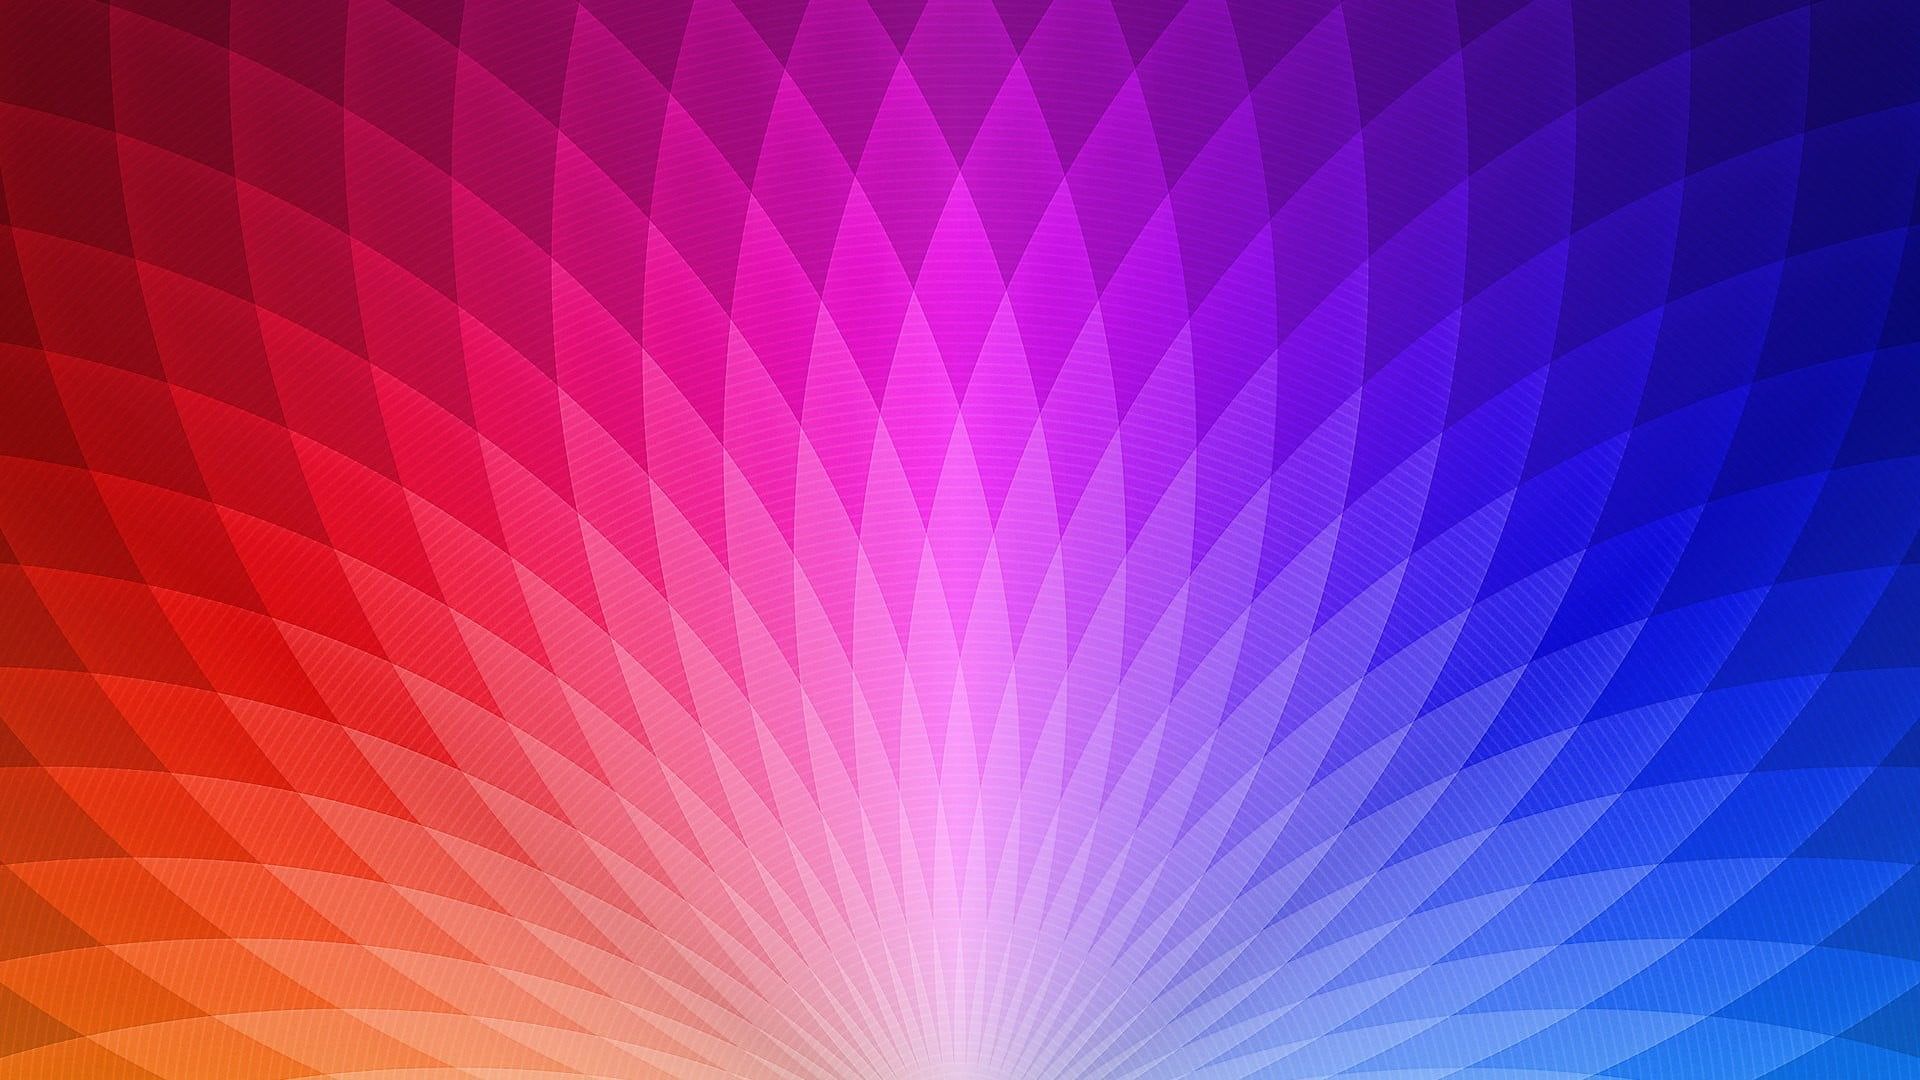 simple simple background #minimalism #abstract P #wallpaper #hdwallpaper #desktop. Colorful wallpaper, Abstract, Rainbow wallpaper